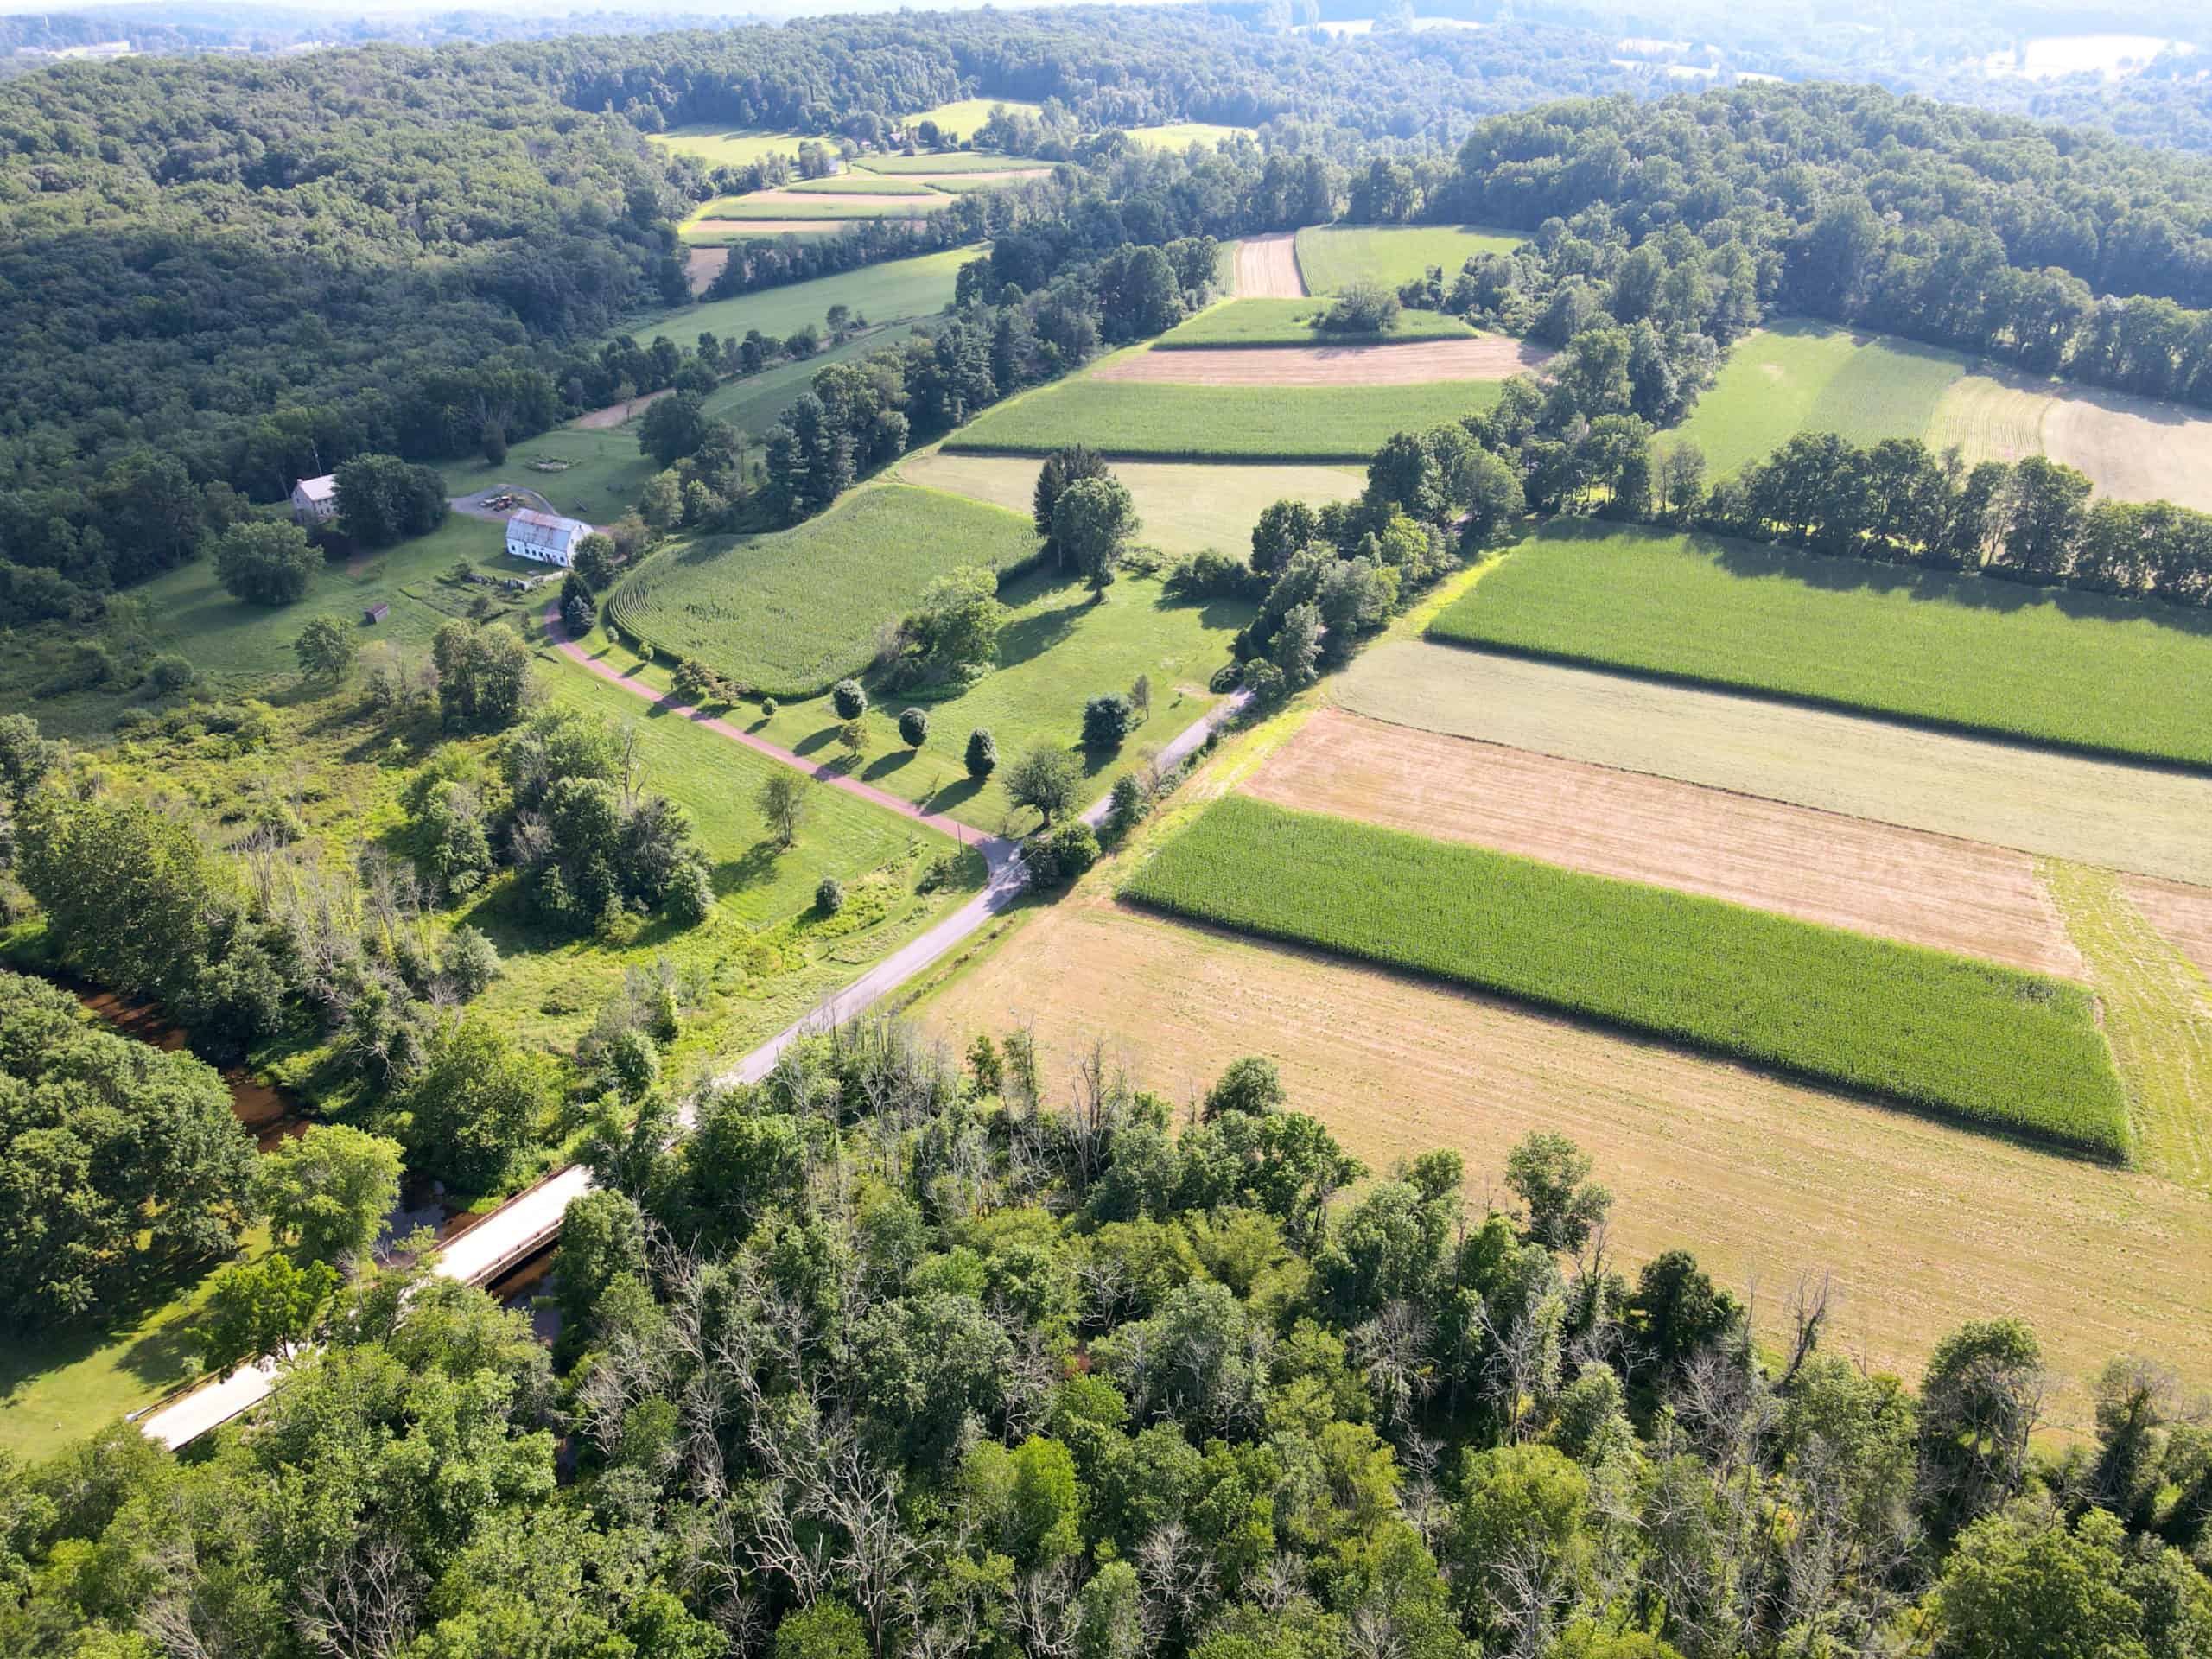 Aerial photo of farm fields and woods at Crow's Nest Preserve